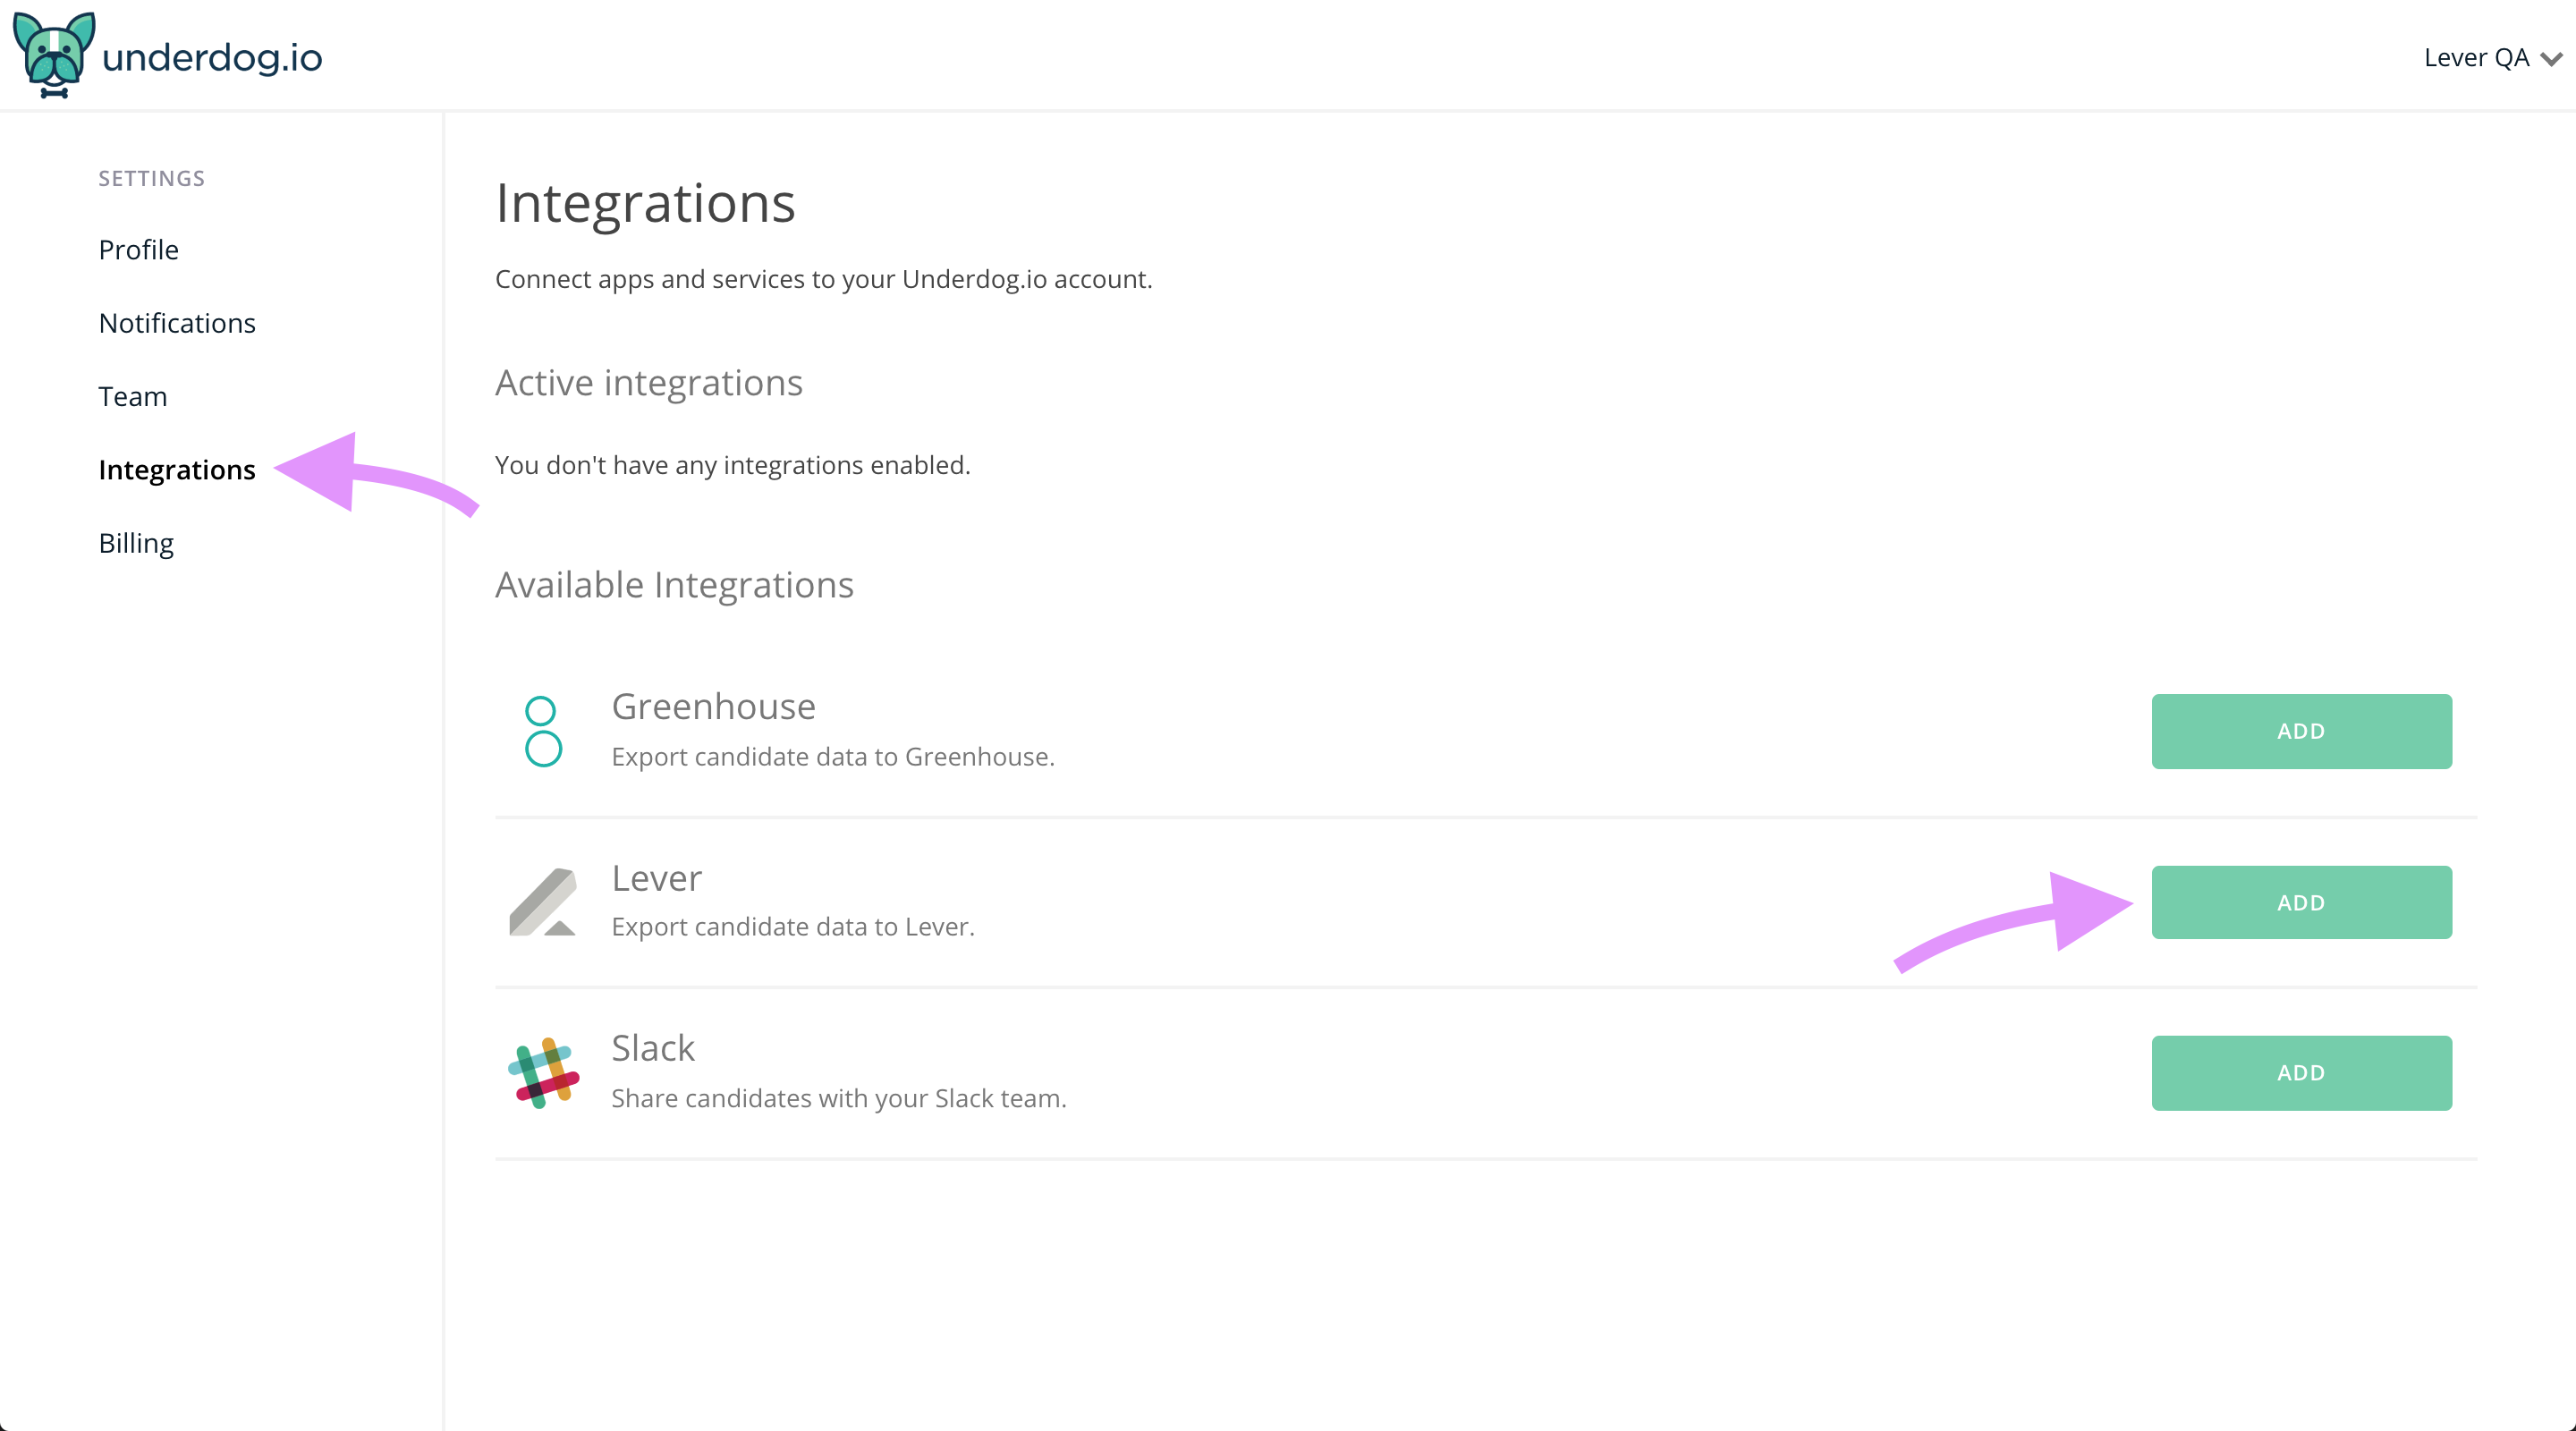 underdog.io settings page with arrows pointing to integrations and the add button next to lever